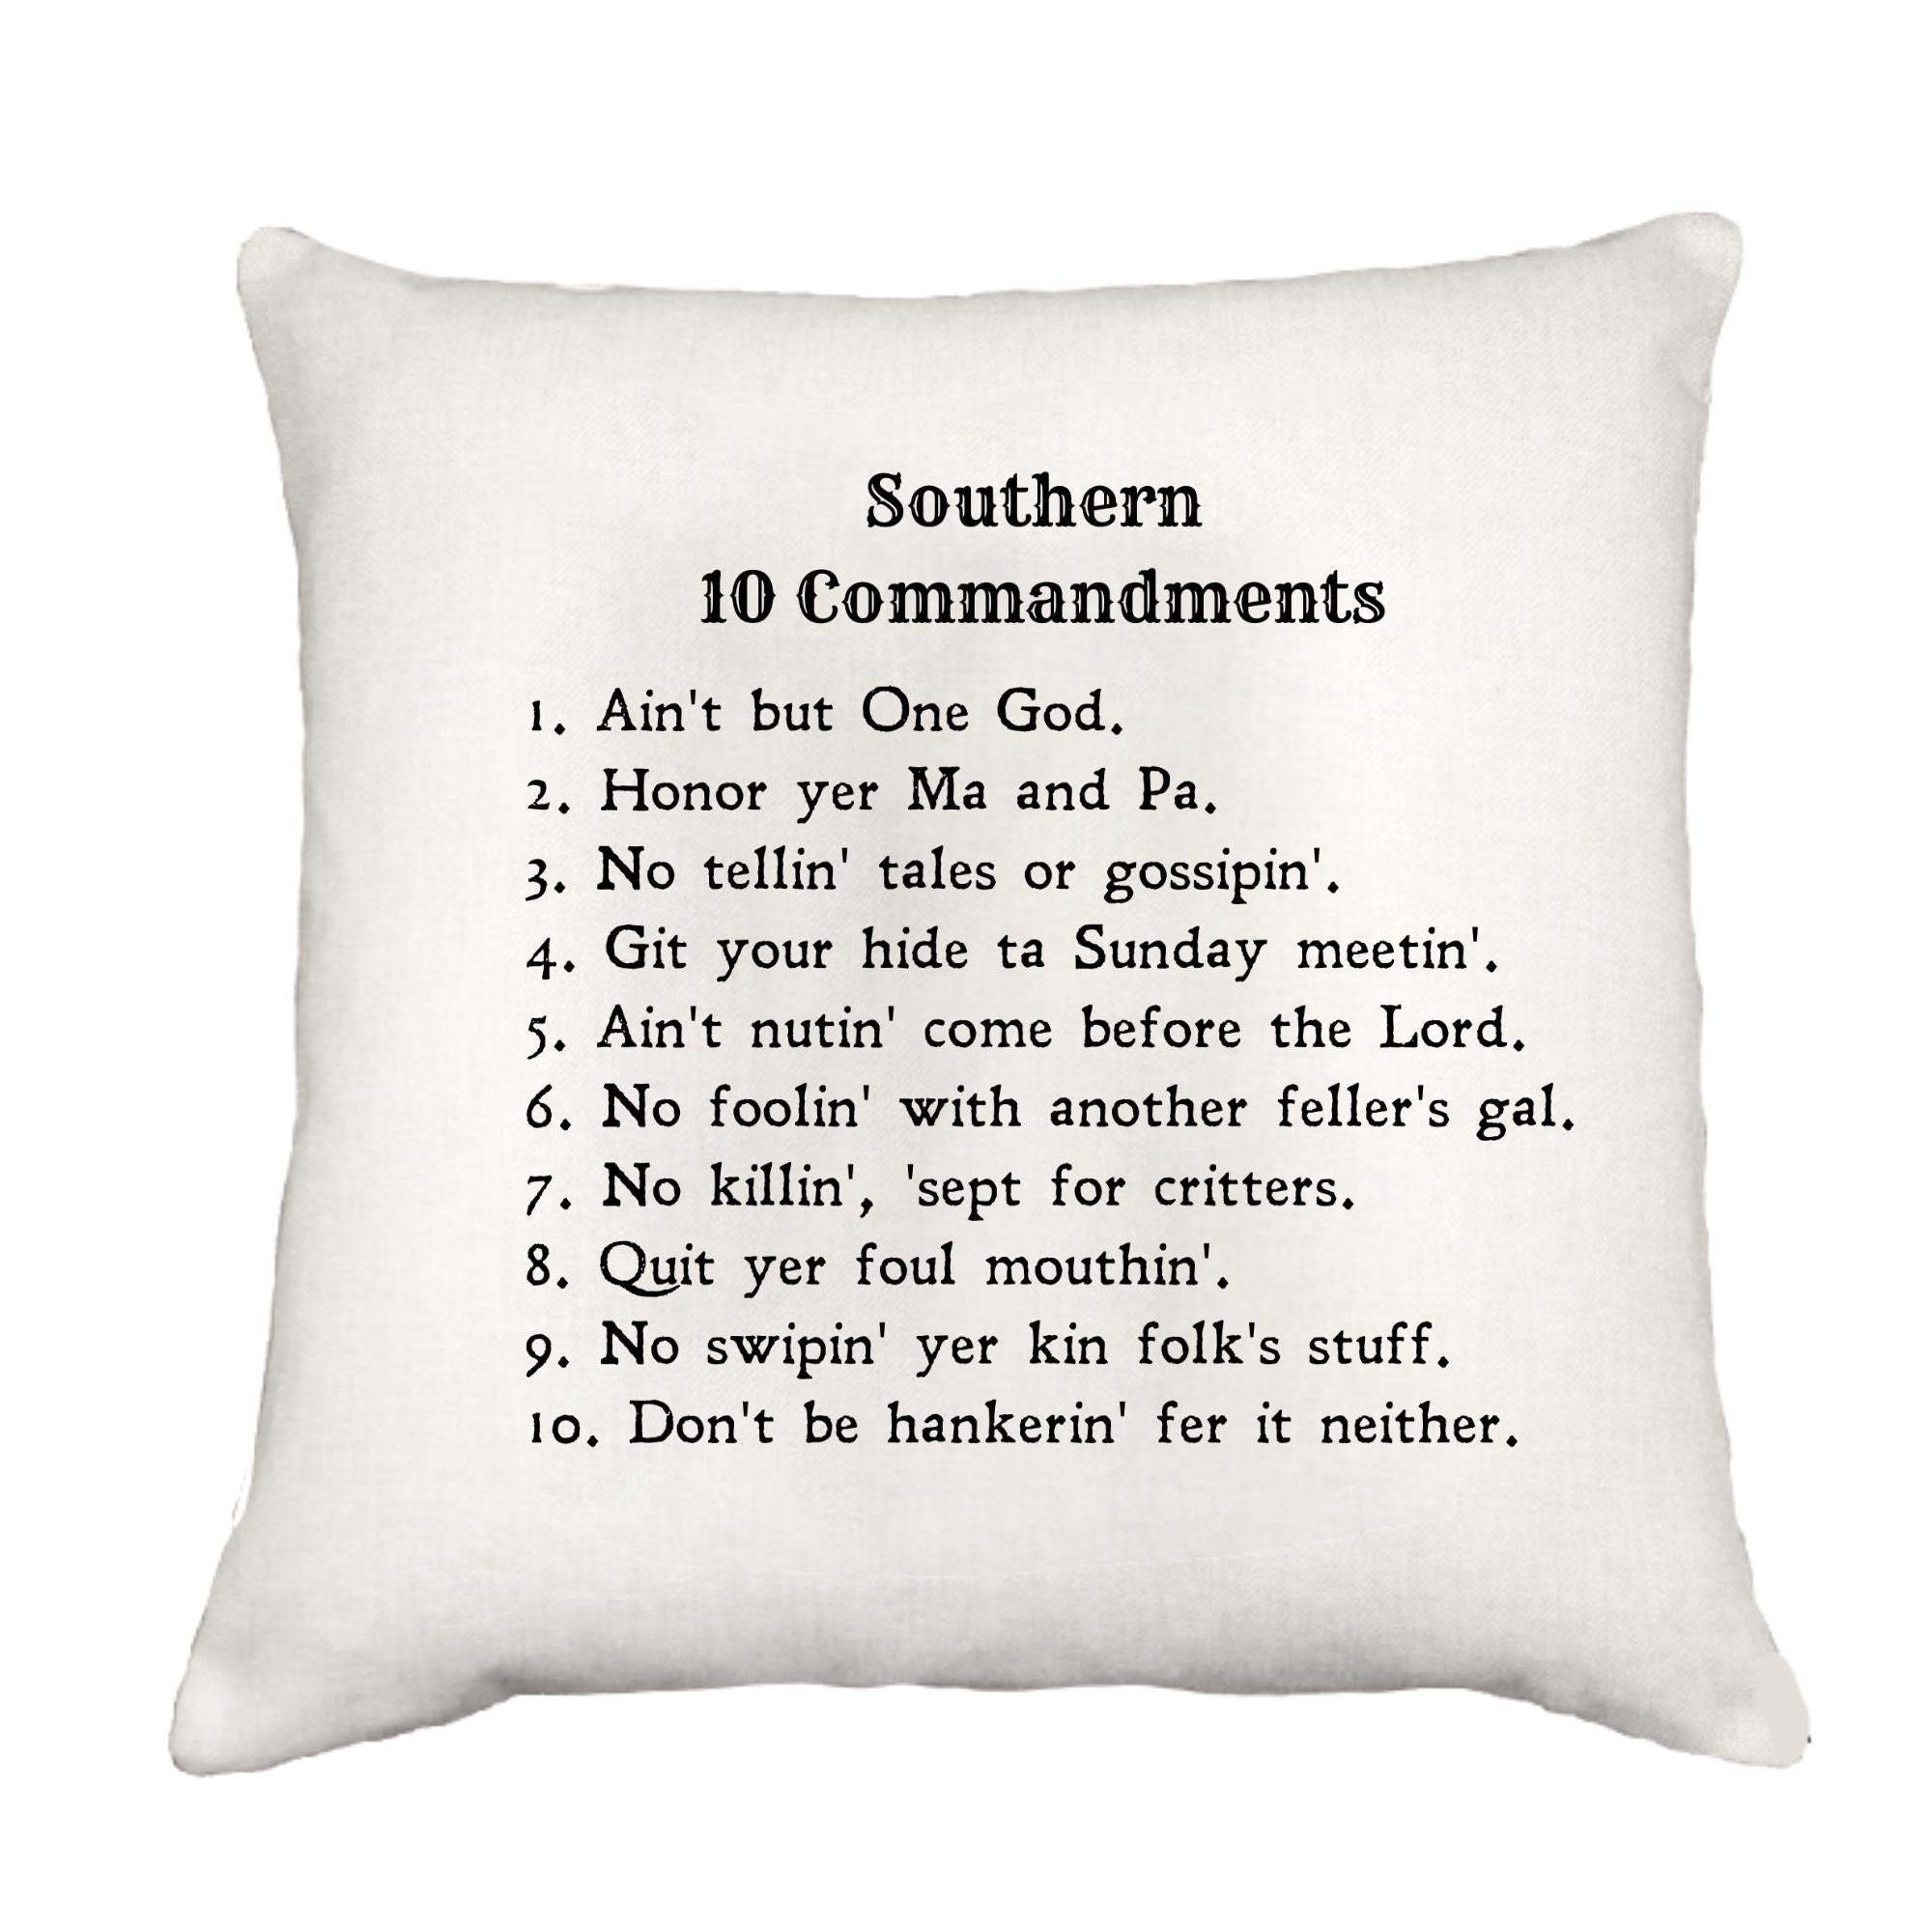 Southern 10 Commandments Cottage Pillow Throw/Decorative Pillow - Southern Sisters